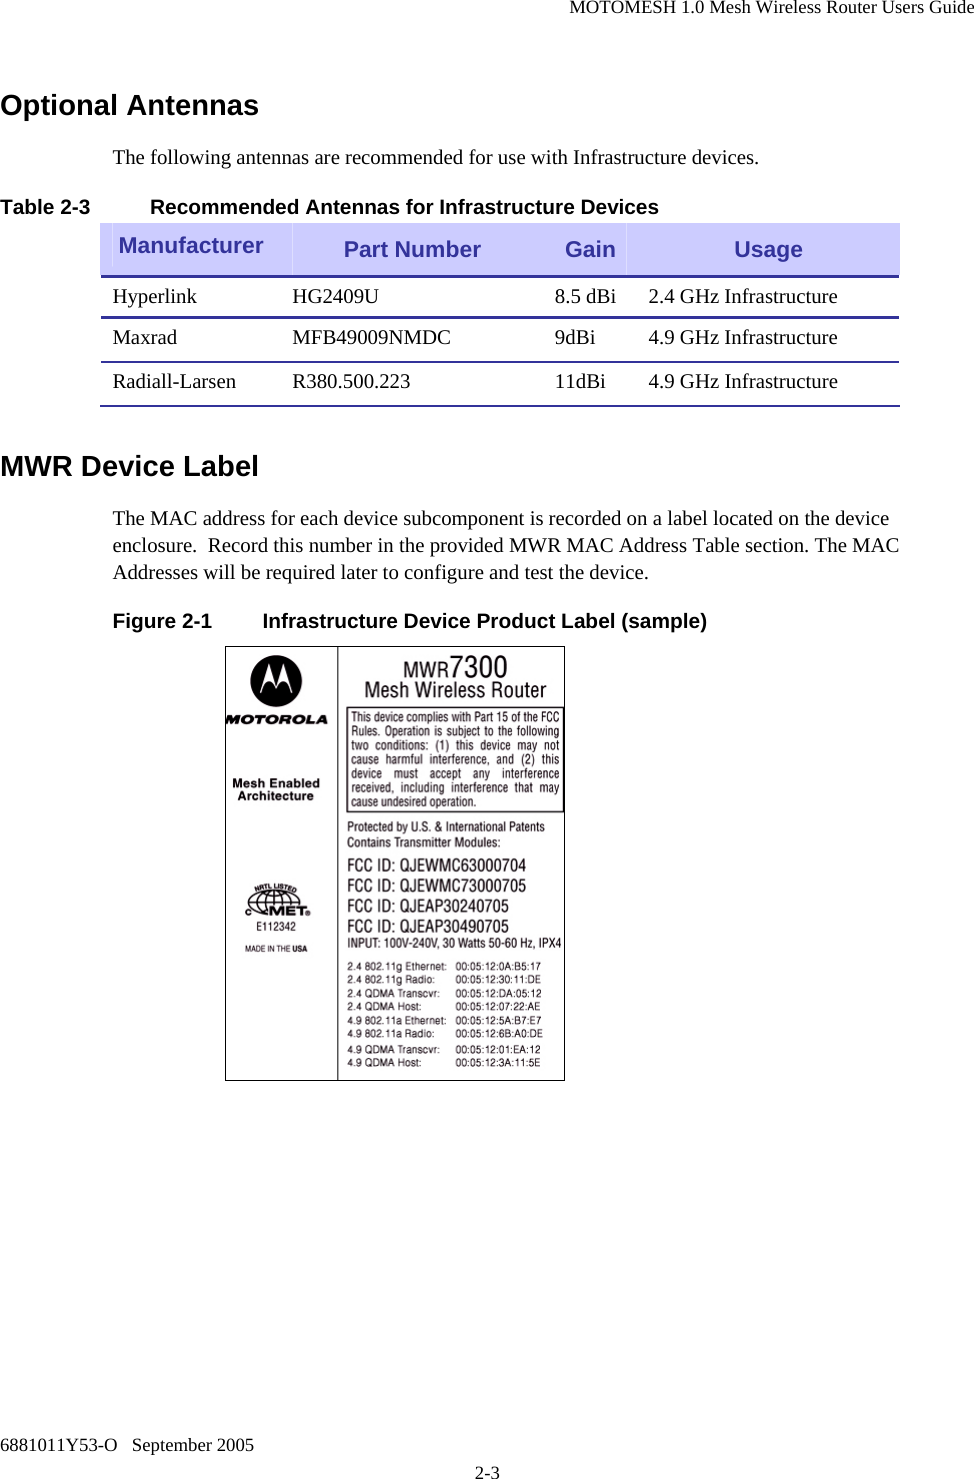 MOTOMESH 1.0 Mesh Wireless Router Users Guide 6881011Y53-O   September 2005 2-3 Optional Antennas The following antennas are recommended for use with Infrastructure devices. Table 2-3  Recommended Antennas for Infrastructure Devices Manufacturer  Part Number  Gain  Usage Hyperlink  HG2409U  8.5 dBi  2.4 GHz Infrastructure Maxrad MFB49009NMDC 9dBi 4.9 GHz Infrastructure Radiall-Larsen R380.500.223  11dBi 4.9 GHz Infrastructure MWR Device Label The MAC address for each device subcomponent is recorded on a label located on the device enclosure.  Record this number in the provided MWR MAC Address Table section. The MAC Addresses will be required later to configure and test the device.  Figure 2-1  Infrastructure Device Product Label (sample)     